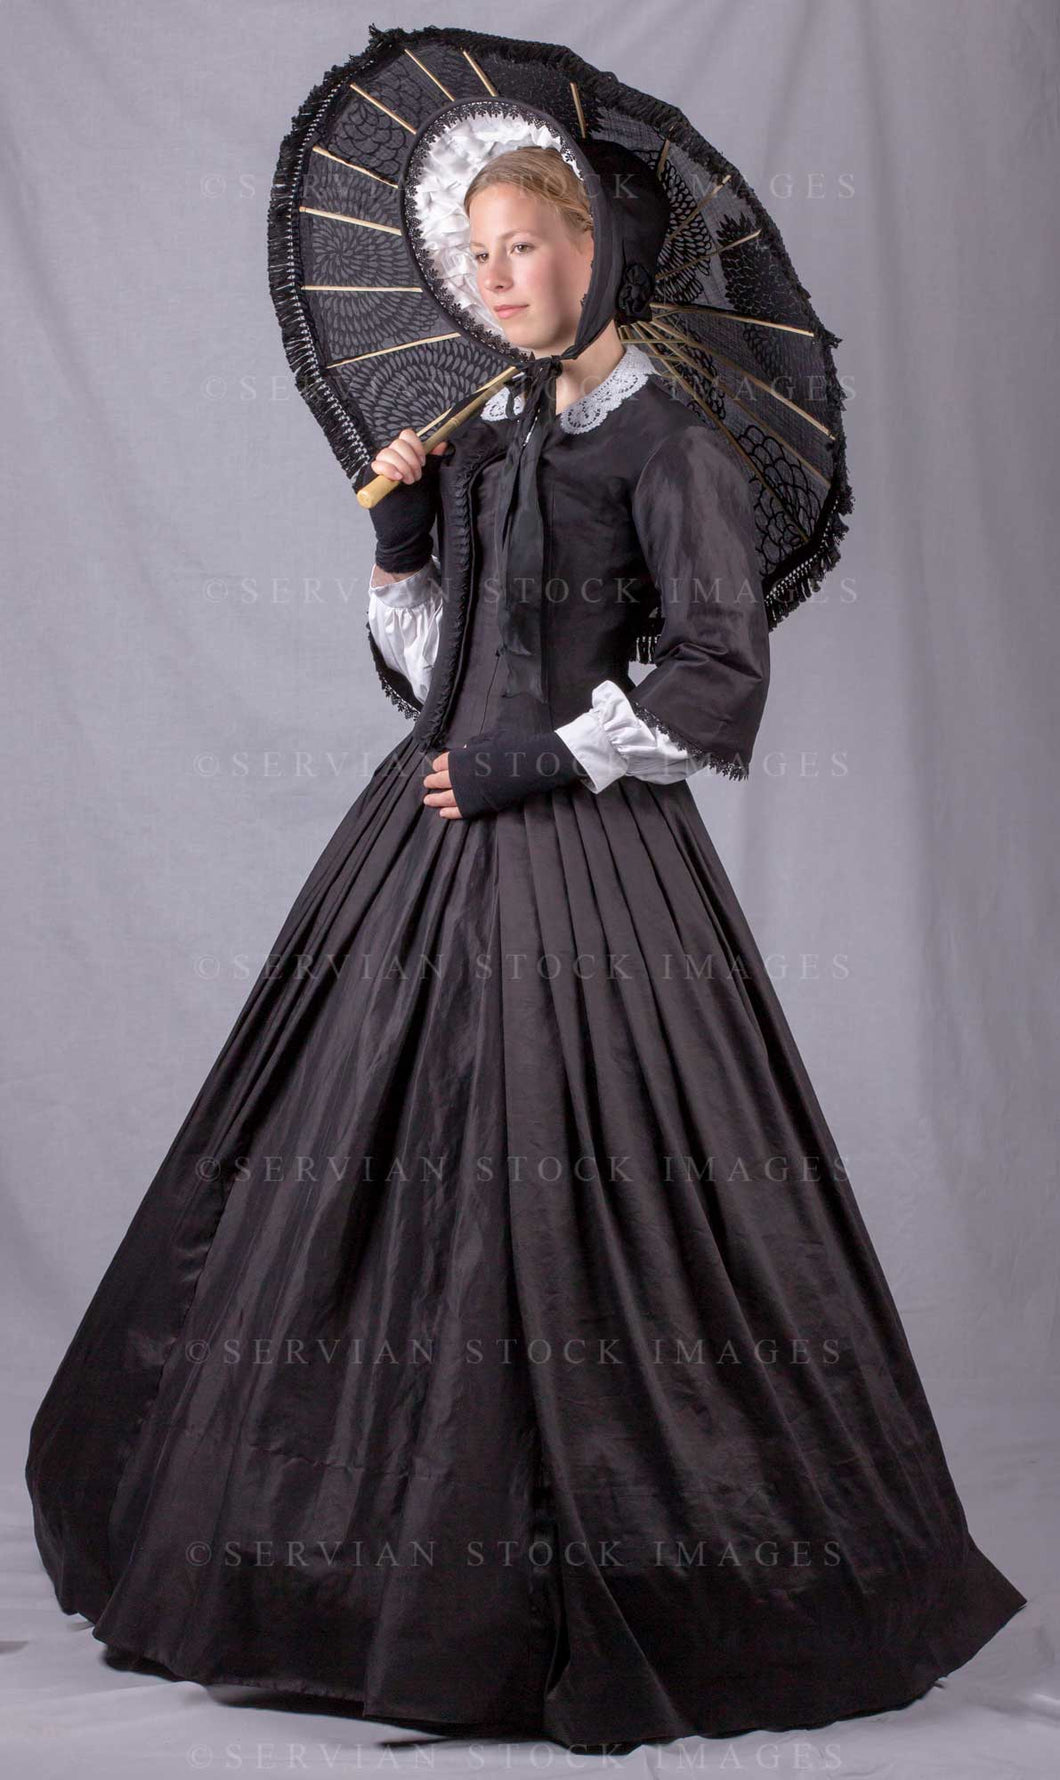 Victorian woman wearing a black bodice and skirt and holding a parasol (Skye 0193)